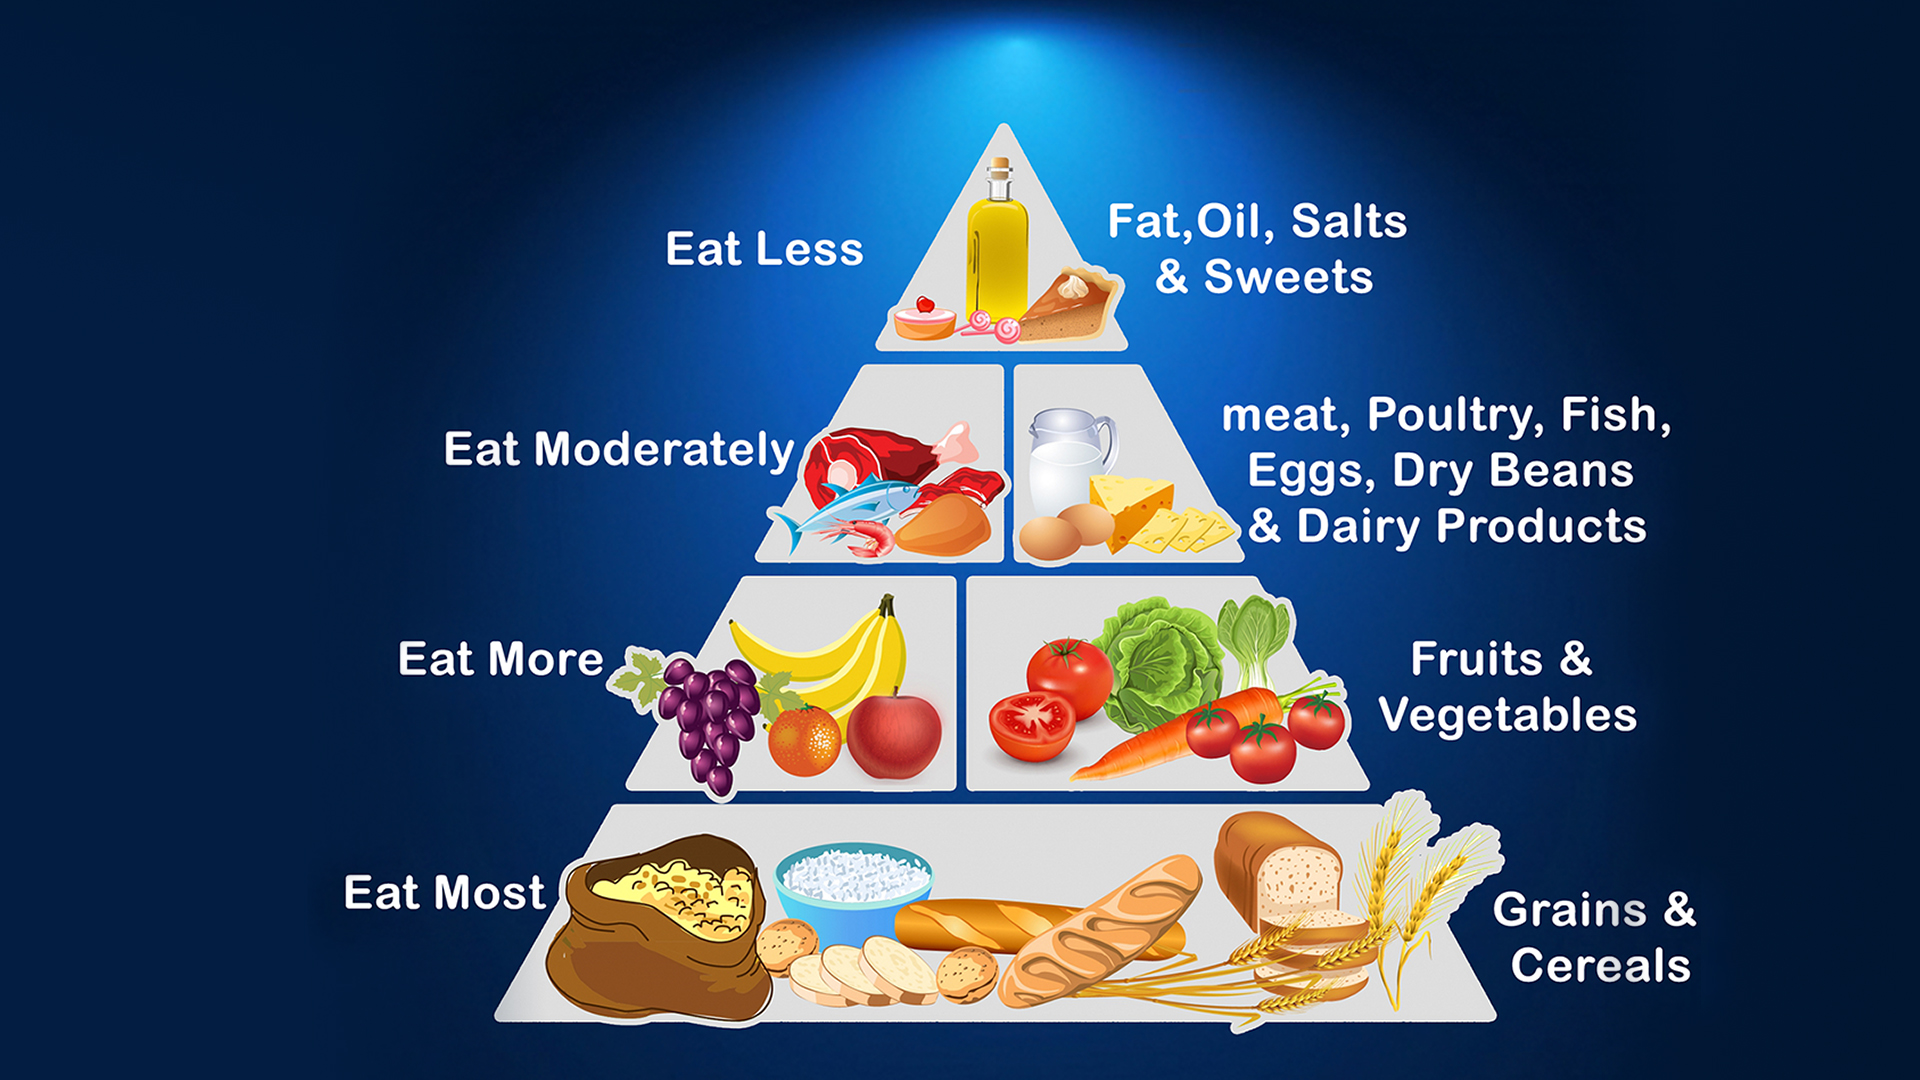 Functions Of Food, Food Groups, Food Pyramid NutritionFact.in